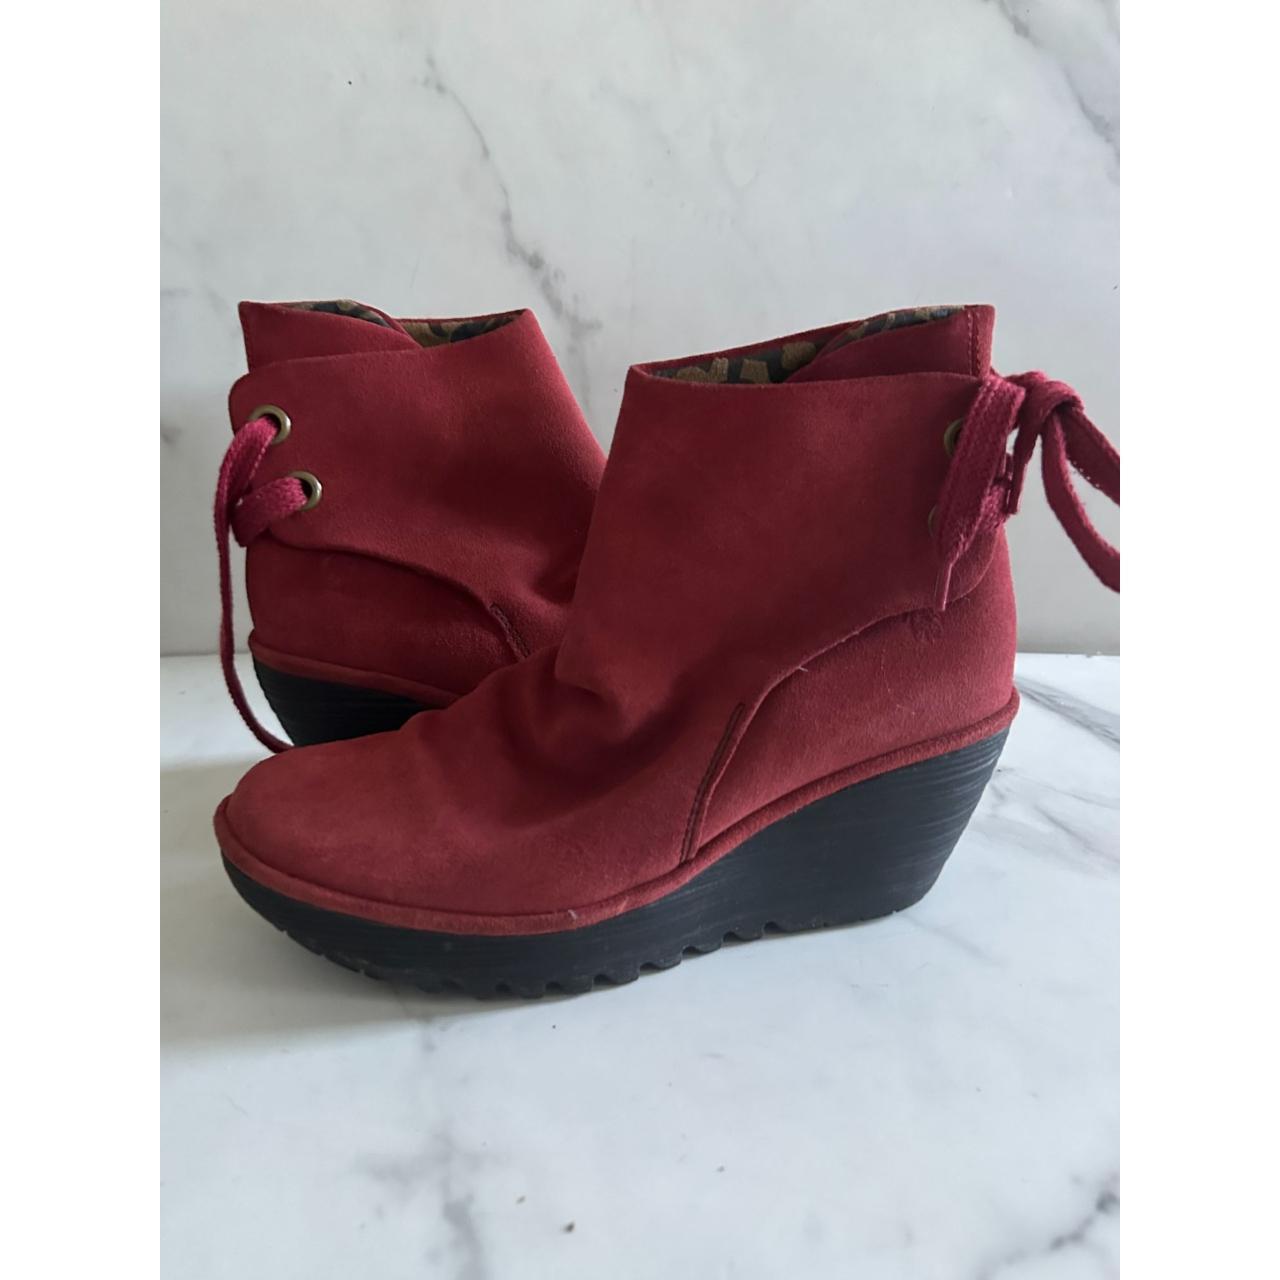 FLY LONDON Red Suede Wedge Ankle Boots Size... - Depop